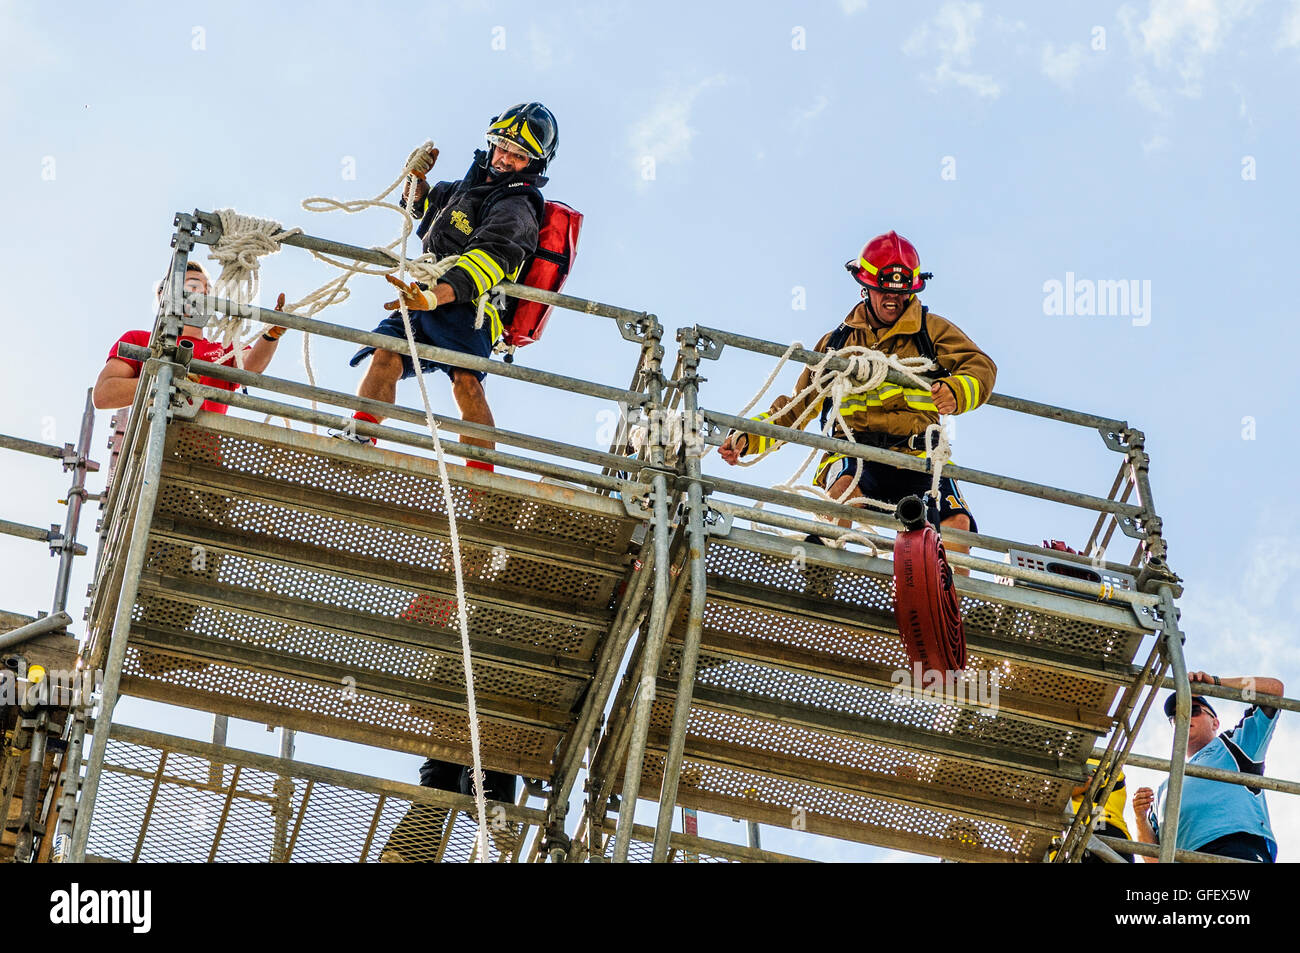 Belfast, Northern Ireland. 8th August 2013 - Two firemen pull hosepipes over 100ft onto a gantry at the Ultimate Firefighter Event, World Police and Fire Games (WPFG) Stock Photo